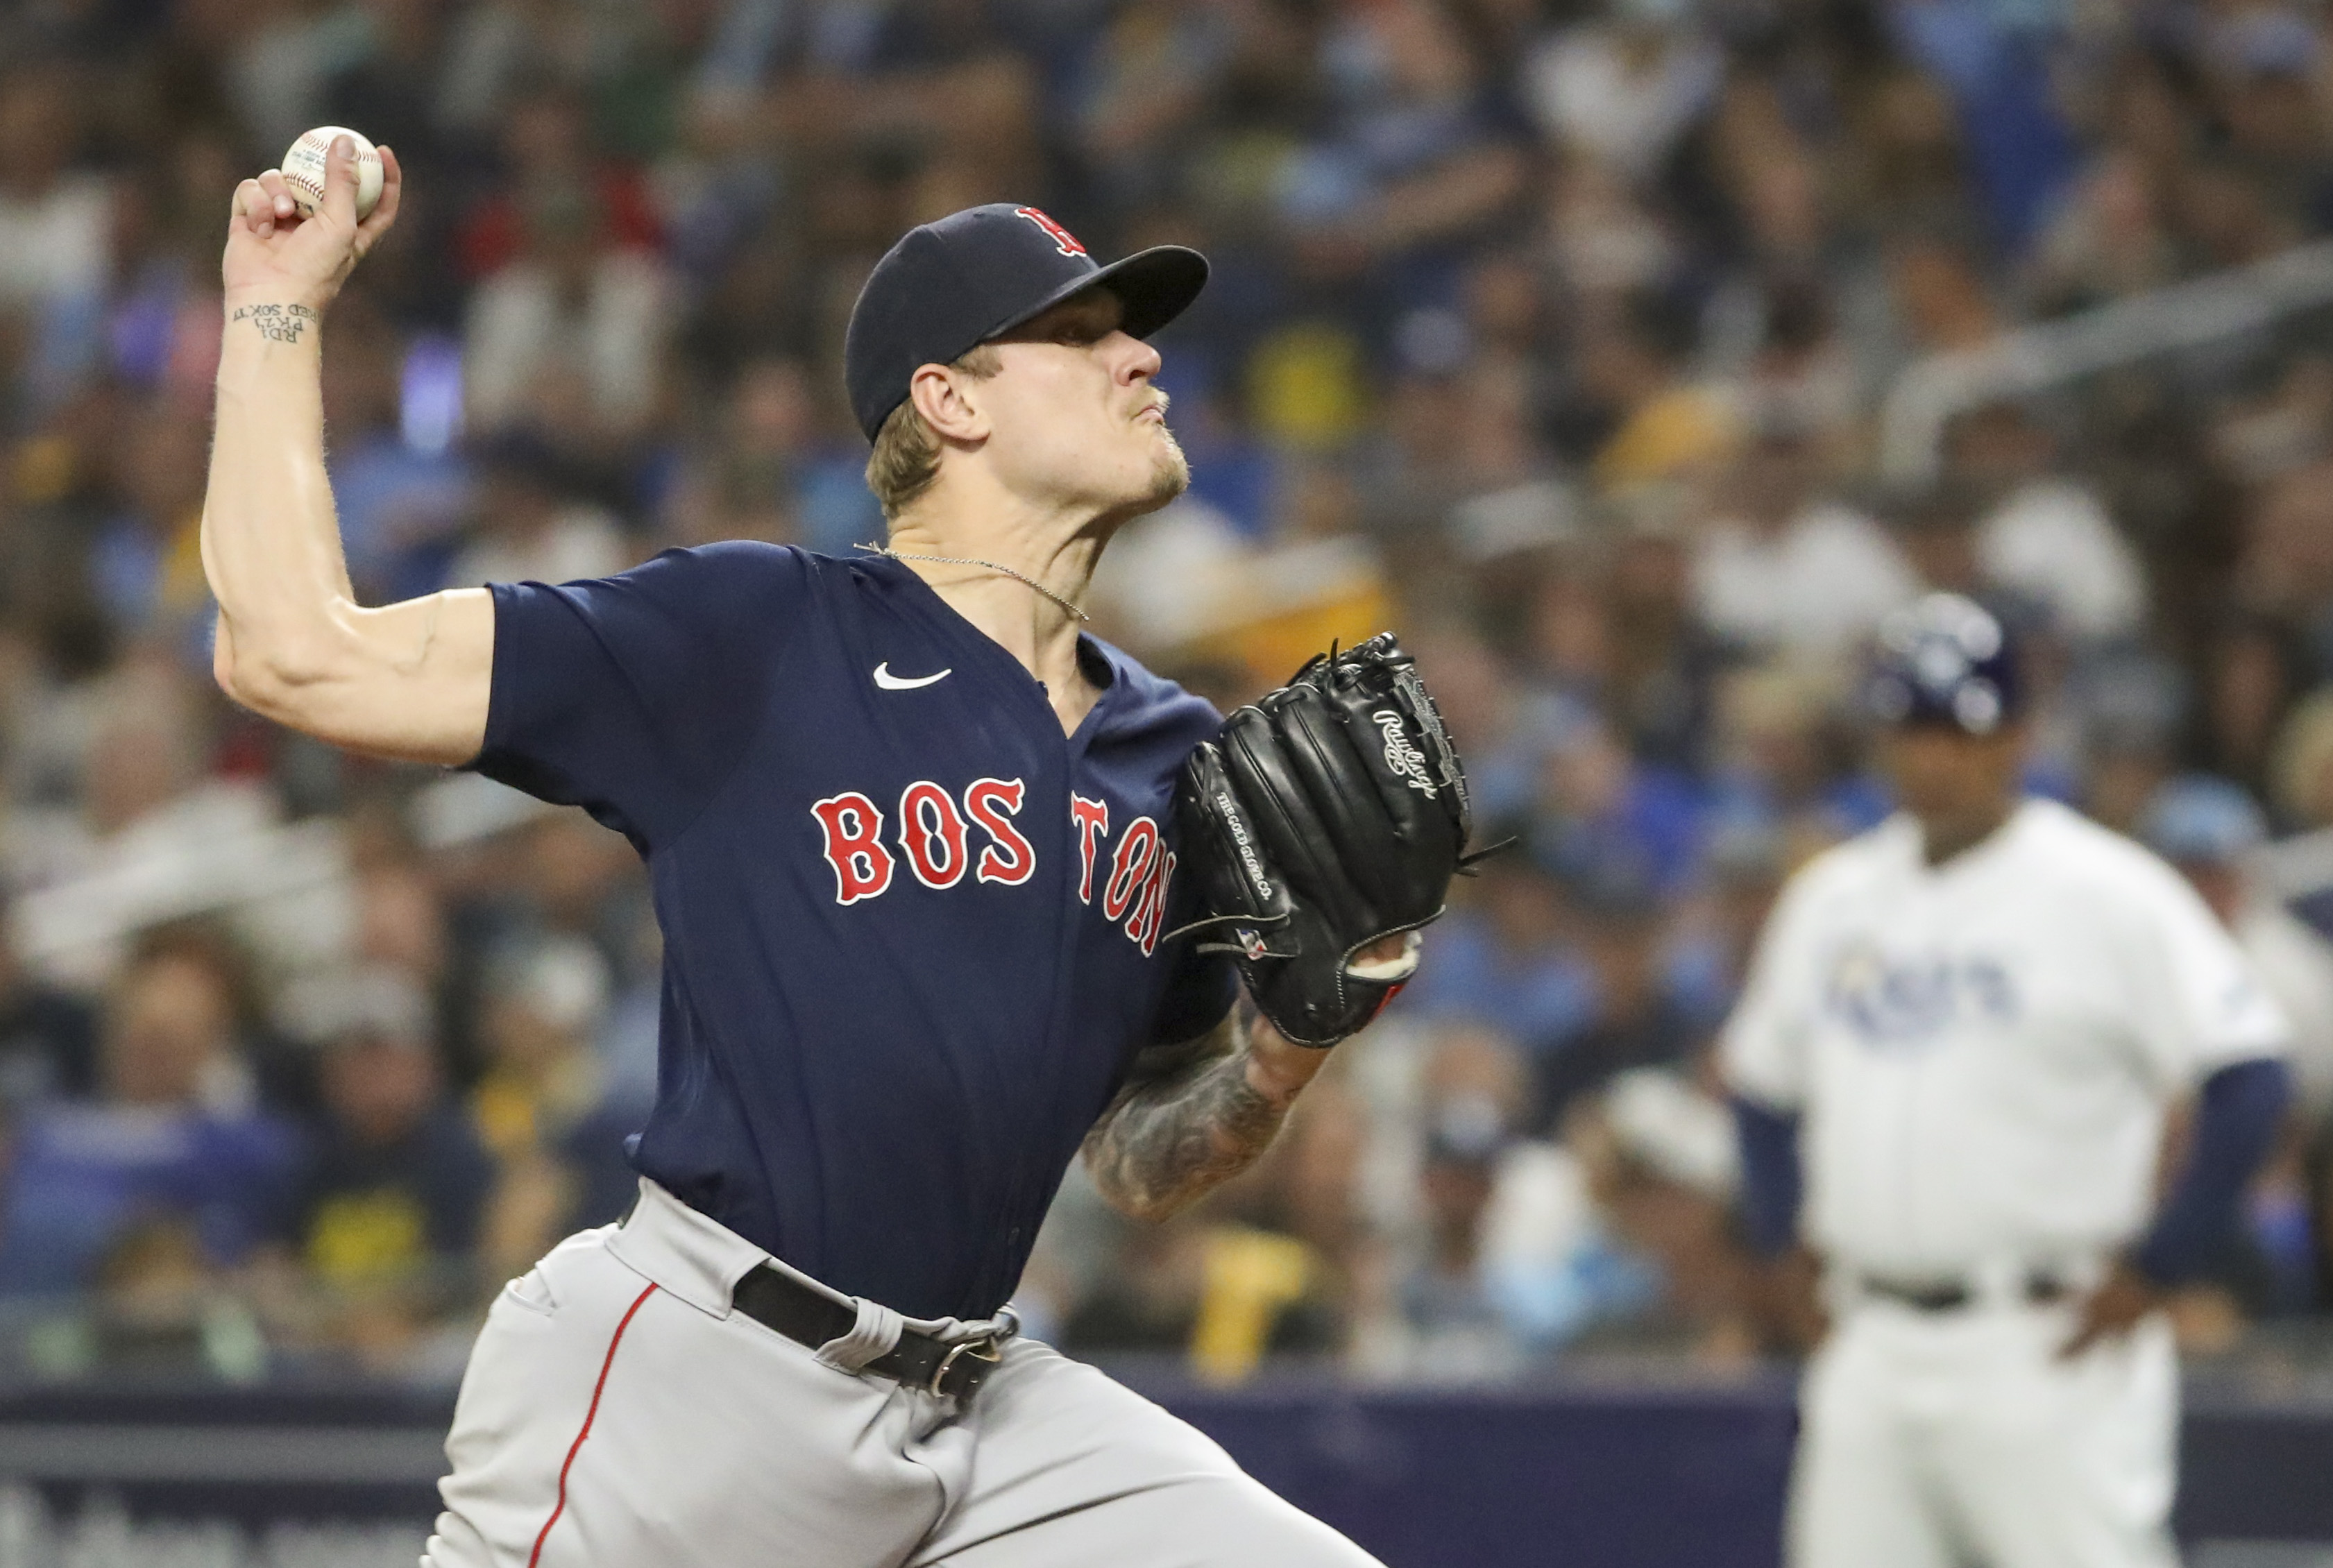 Tanner Houck supplies the real power in Red Sox's win